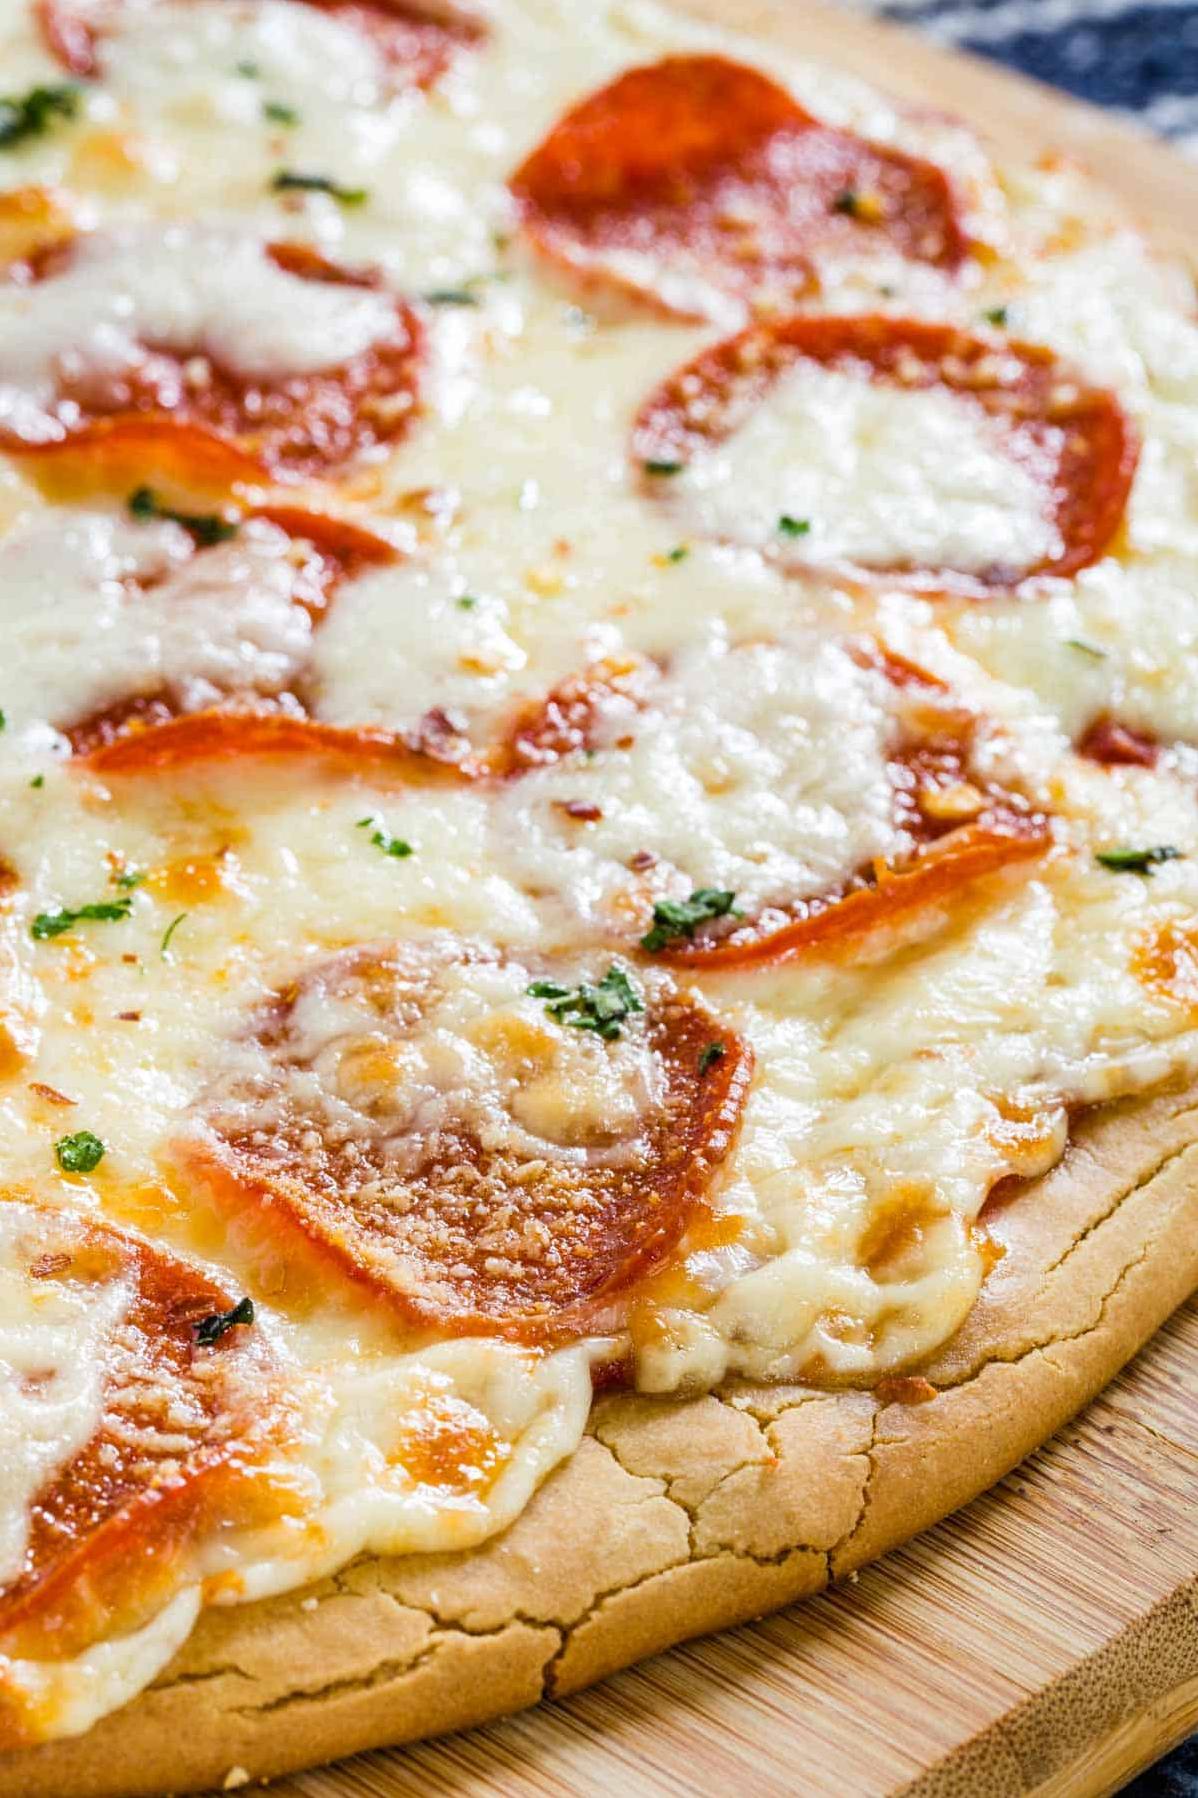  Say goodbye to the soggy gluten-free crust and hello to a delicious and crispy alternative!